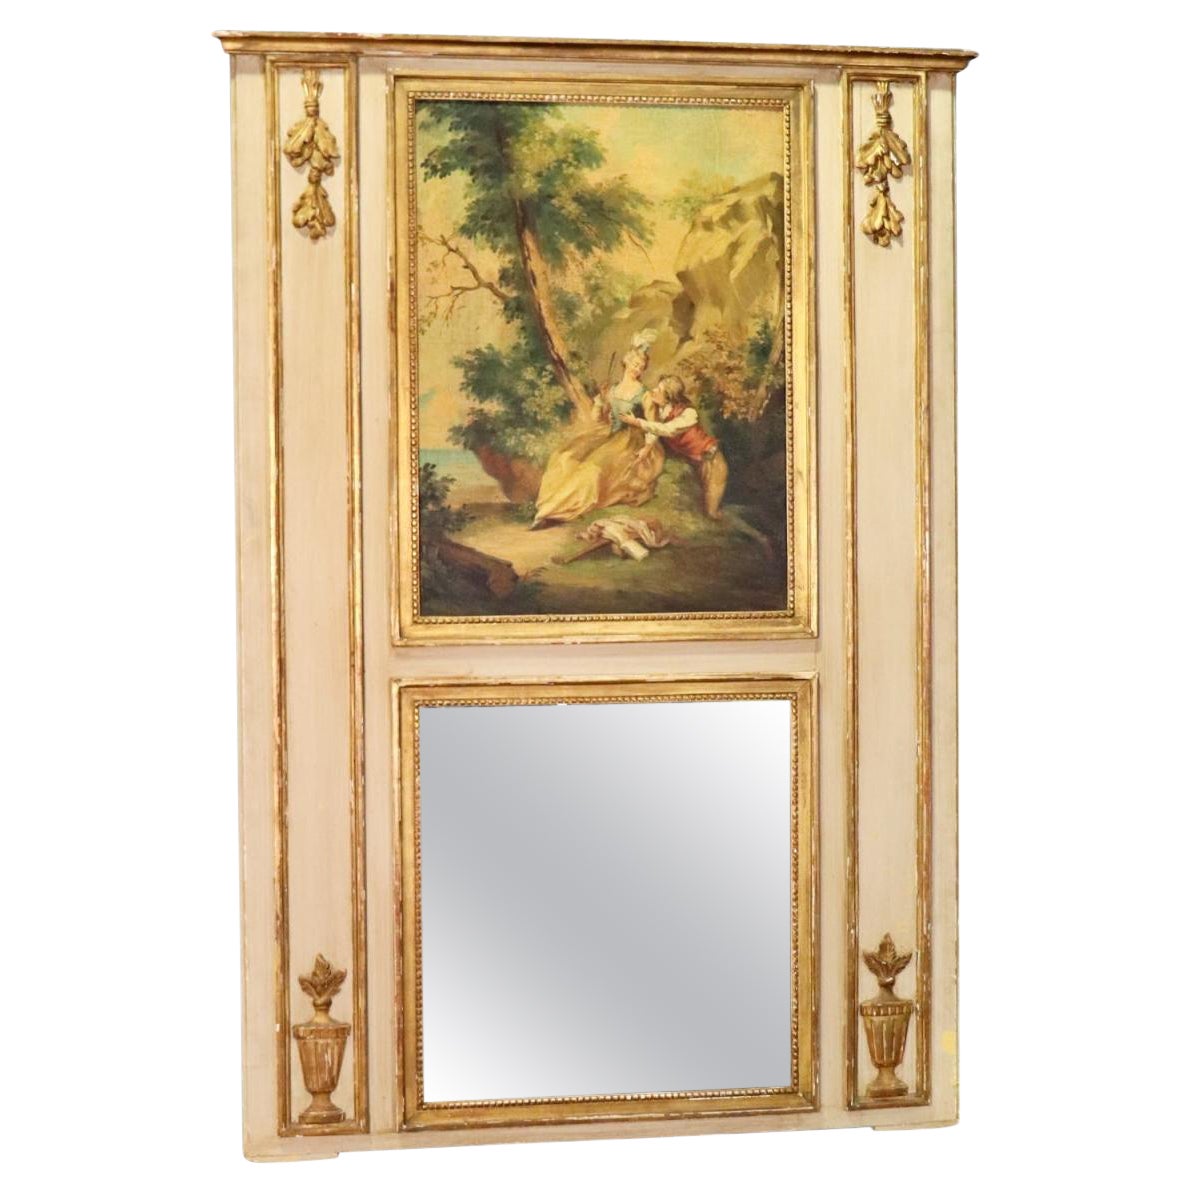 Monumental Antique French Painted Trumeau Mirror With Courtship Scenery  For Sale